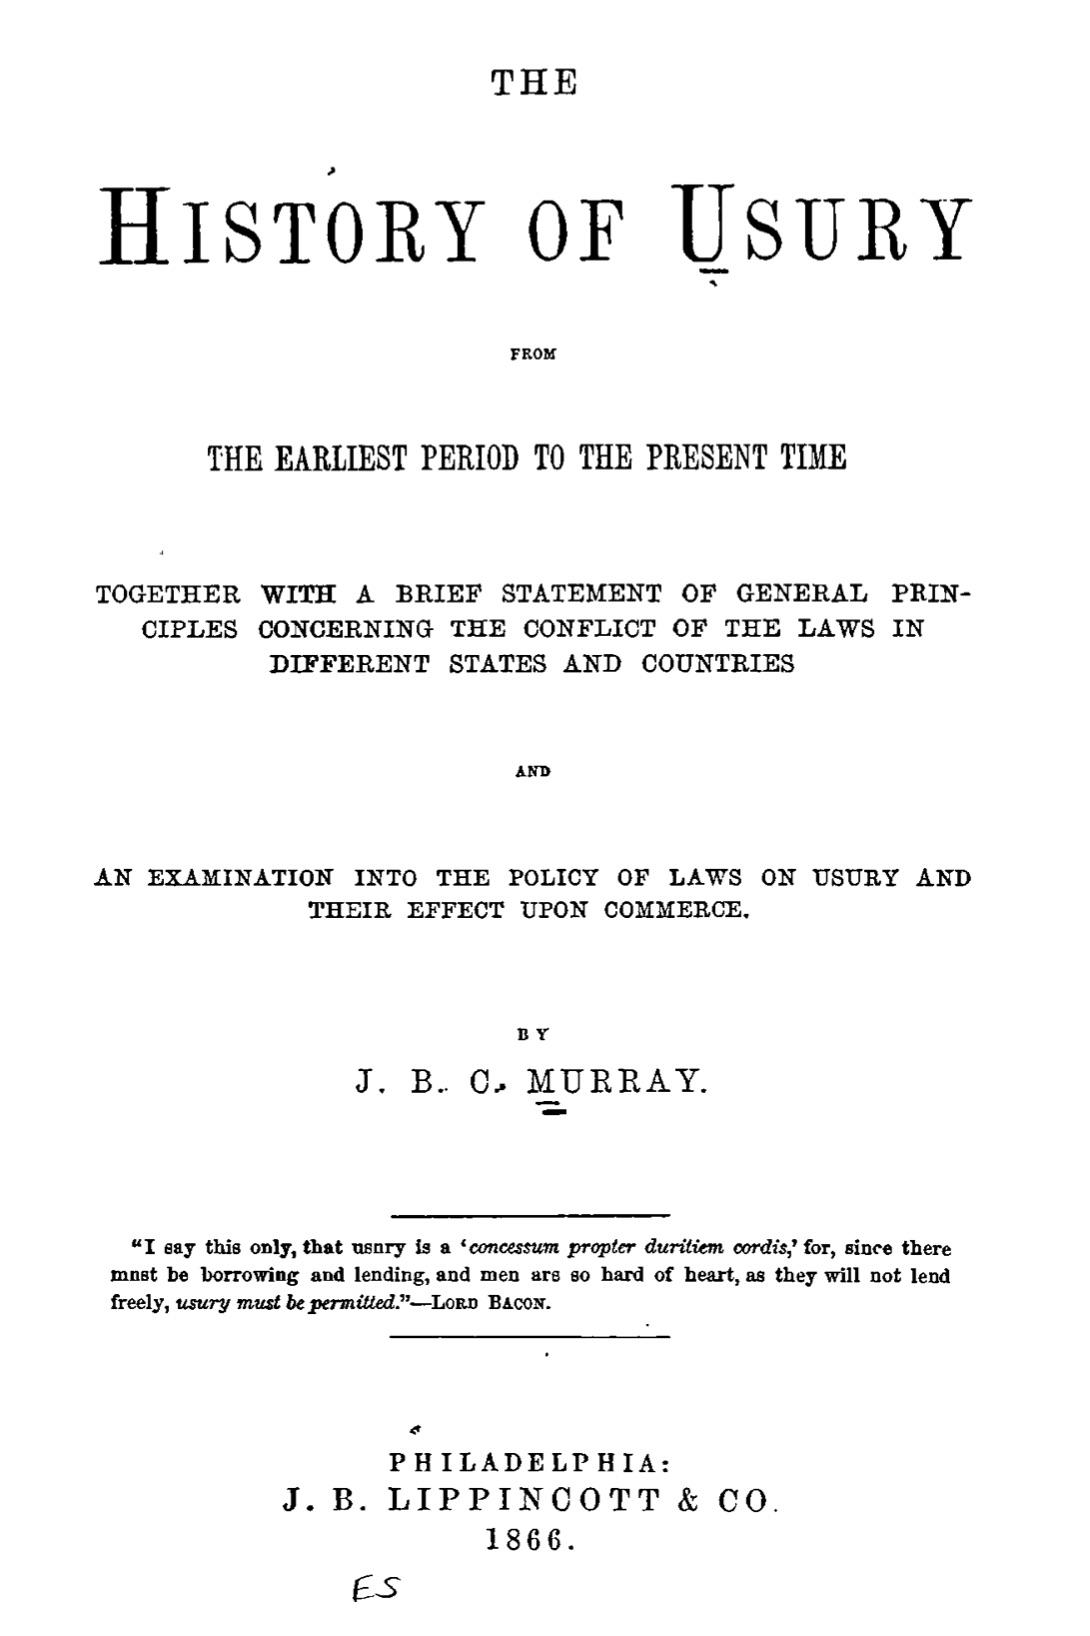 The history of usury from the earliest period to the present time : together with a brief statement of general principles concerning the conflict of the laws in different states and countries, and an examination into the policy of laws on usury and their effect upon commerce (1866) by J. B. C. Murray